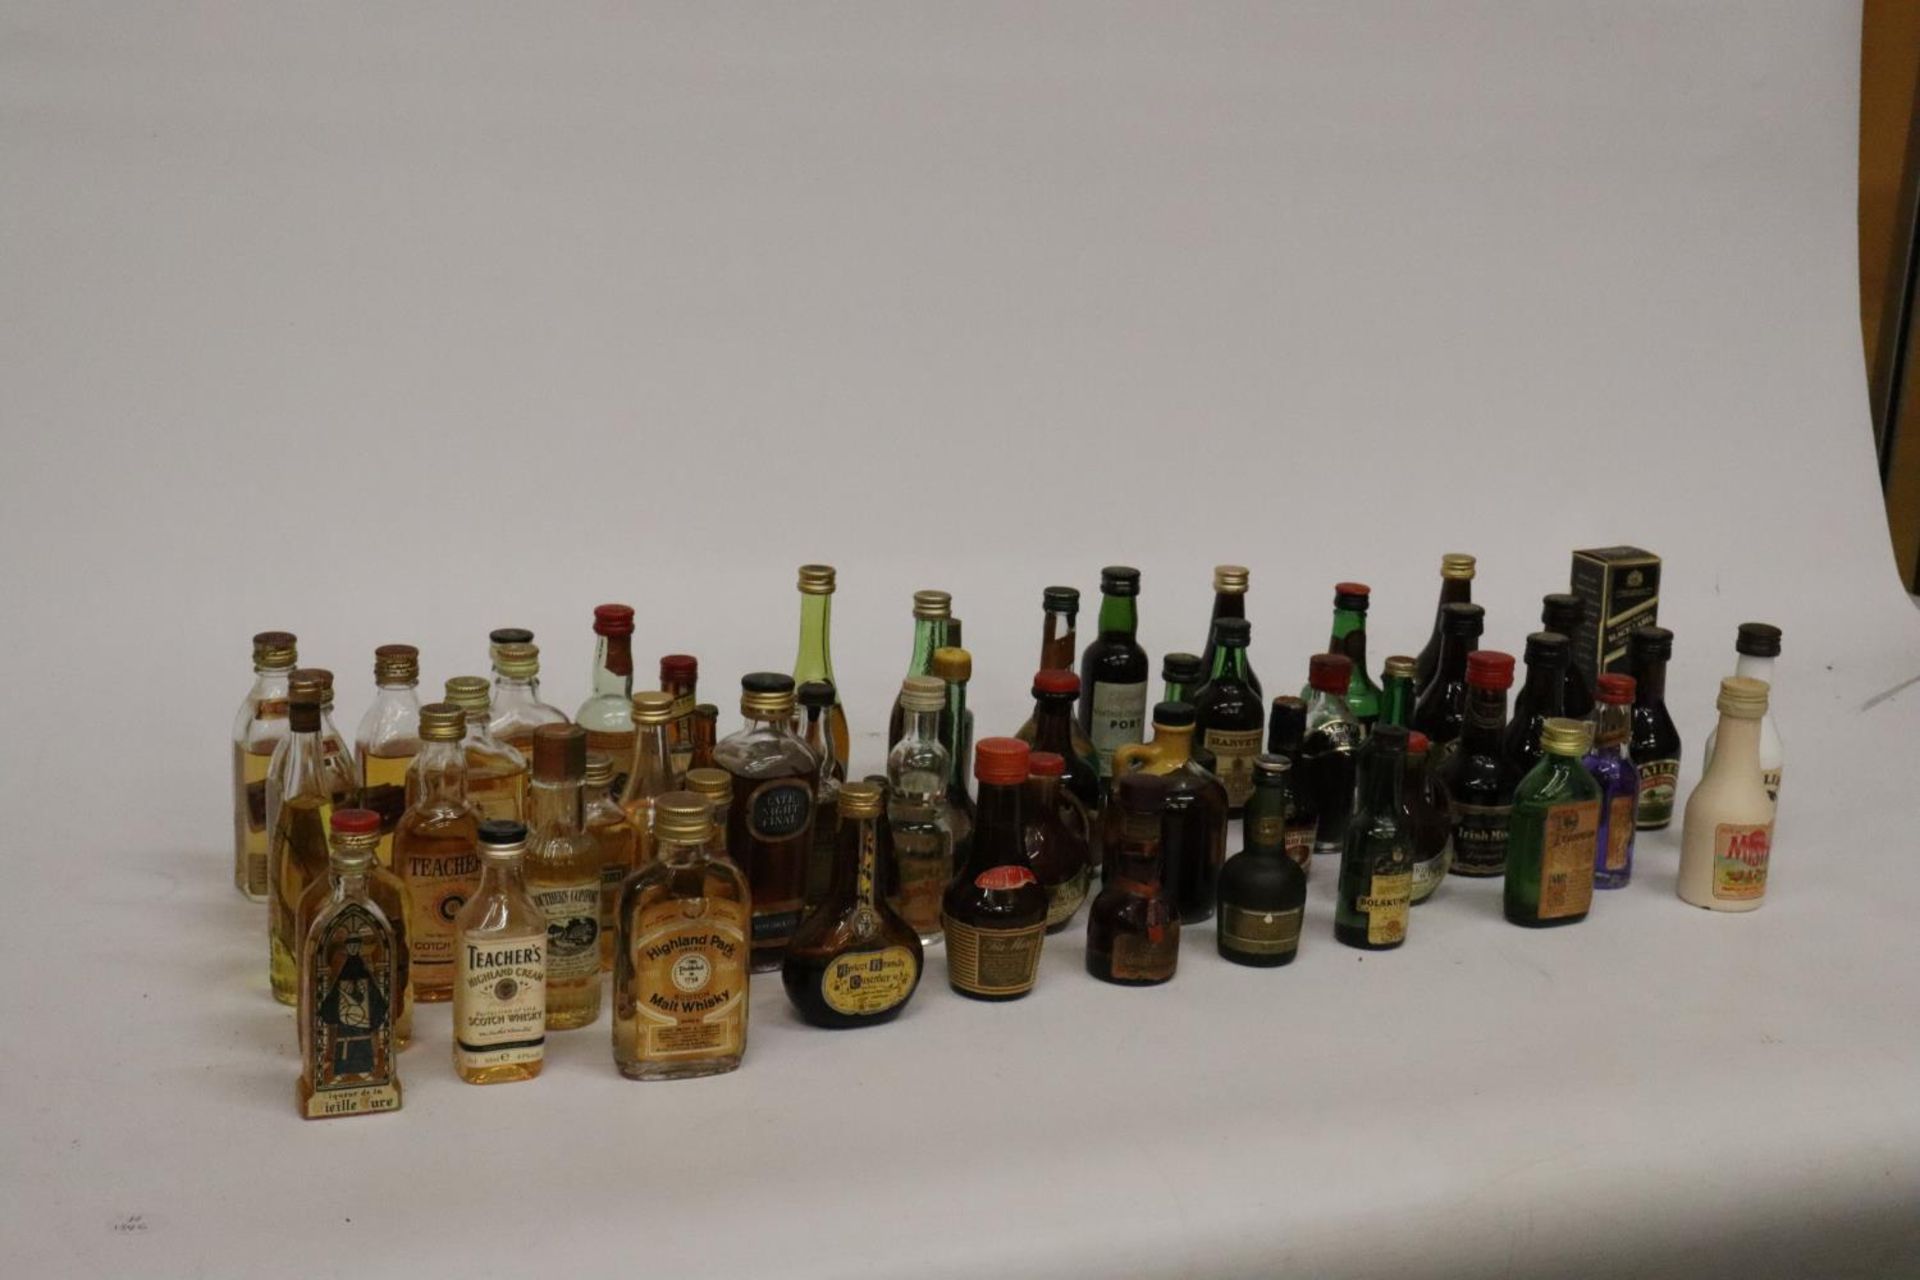 A LARGE QUANTITY OF MINIATURE BOTTLES OF ALCOHOL - Image 8 of 10